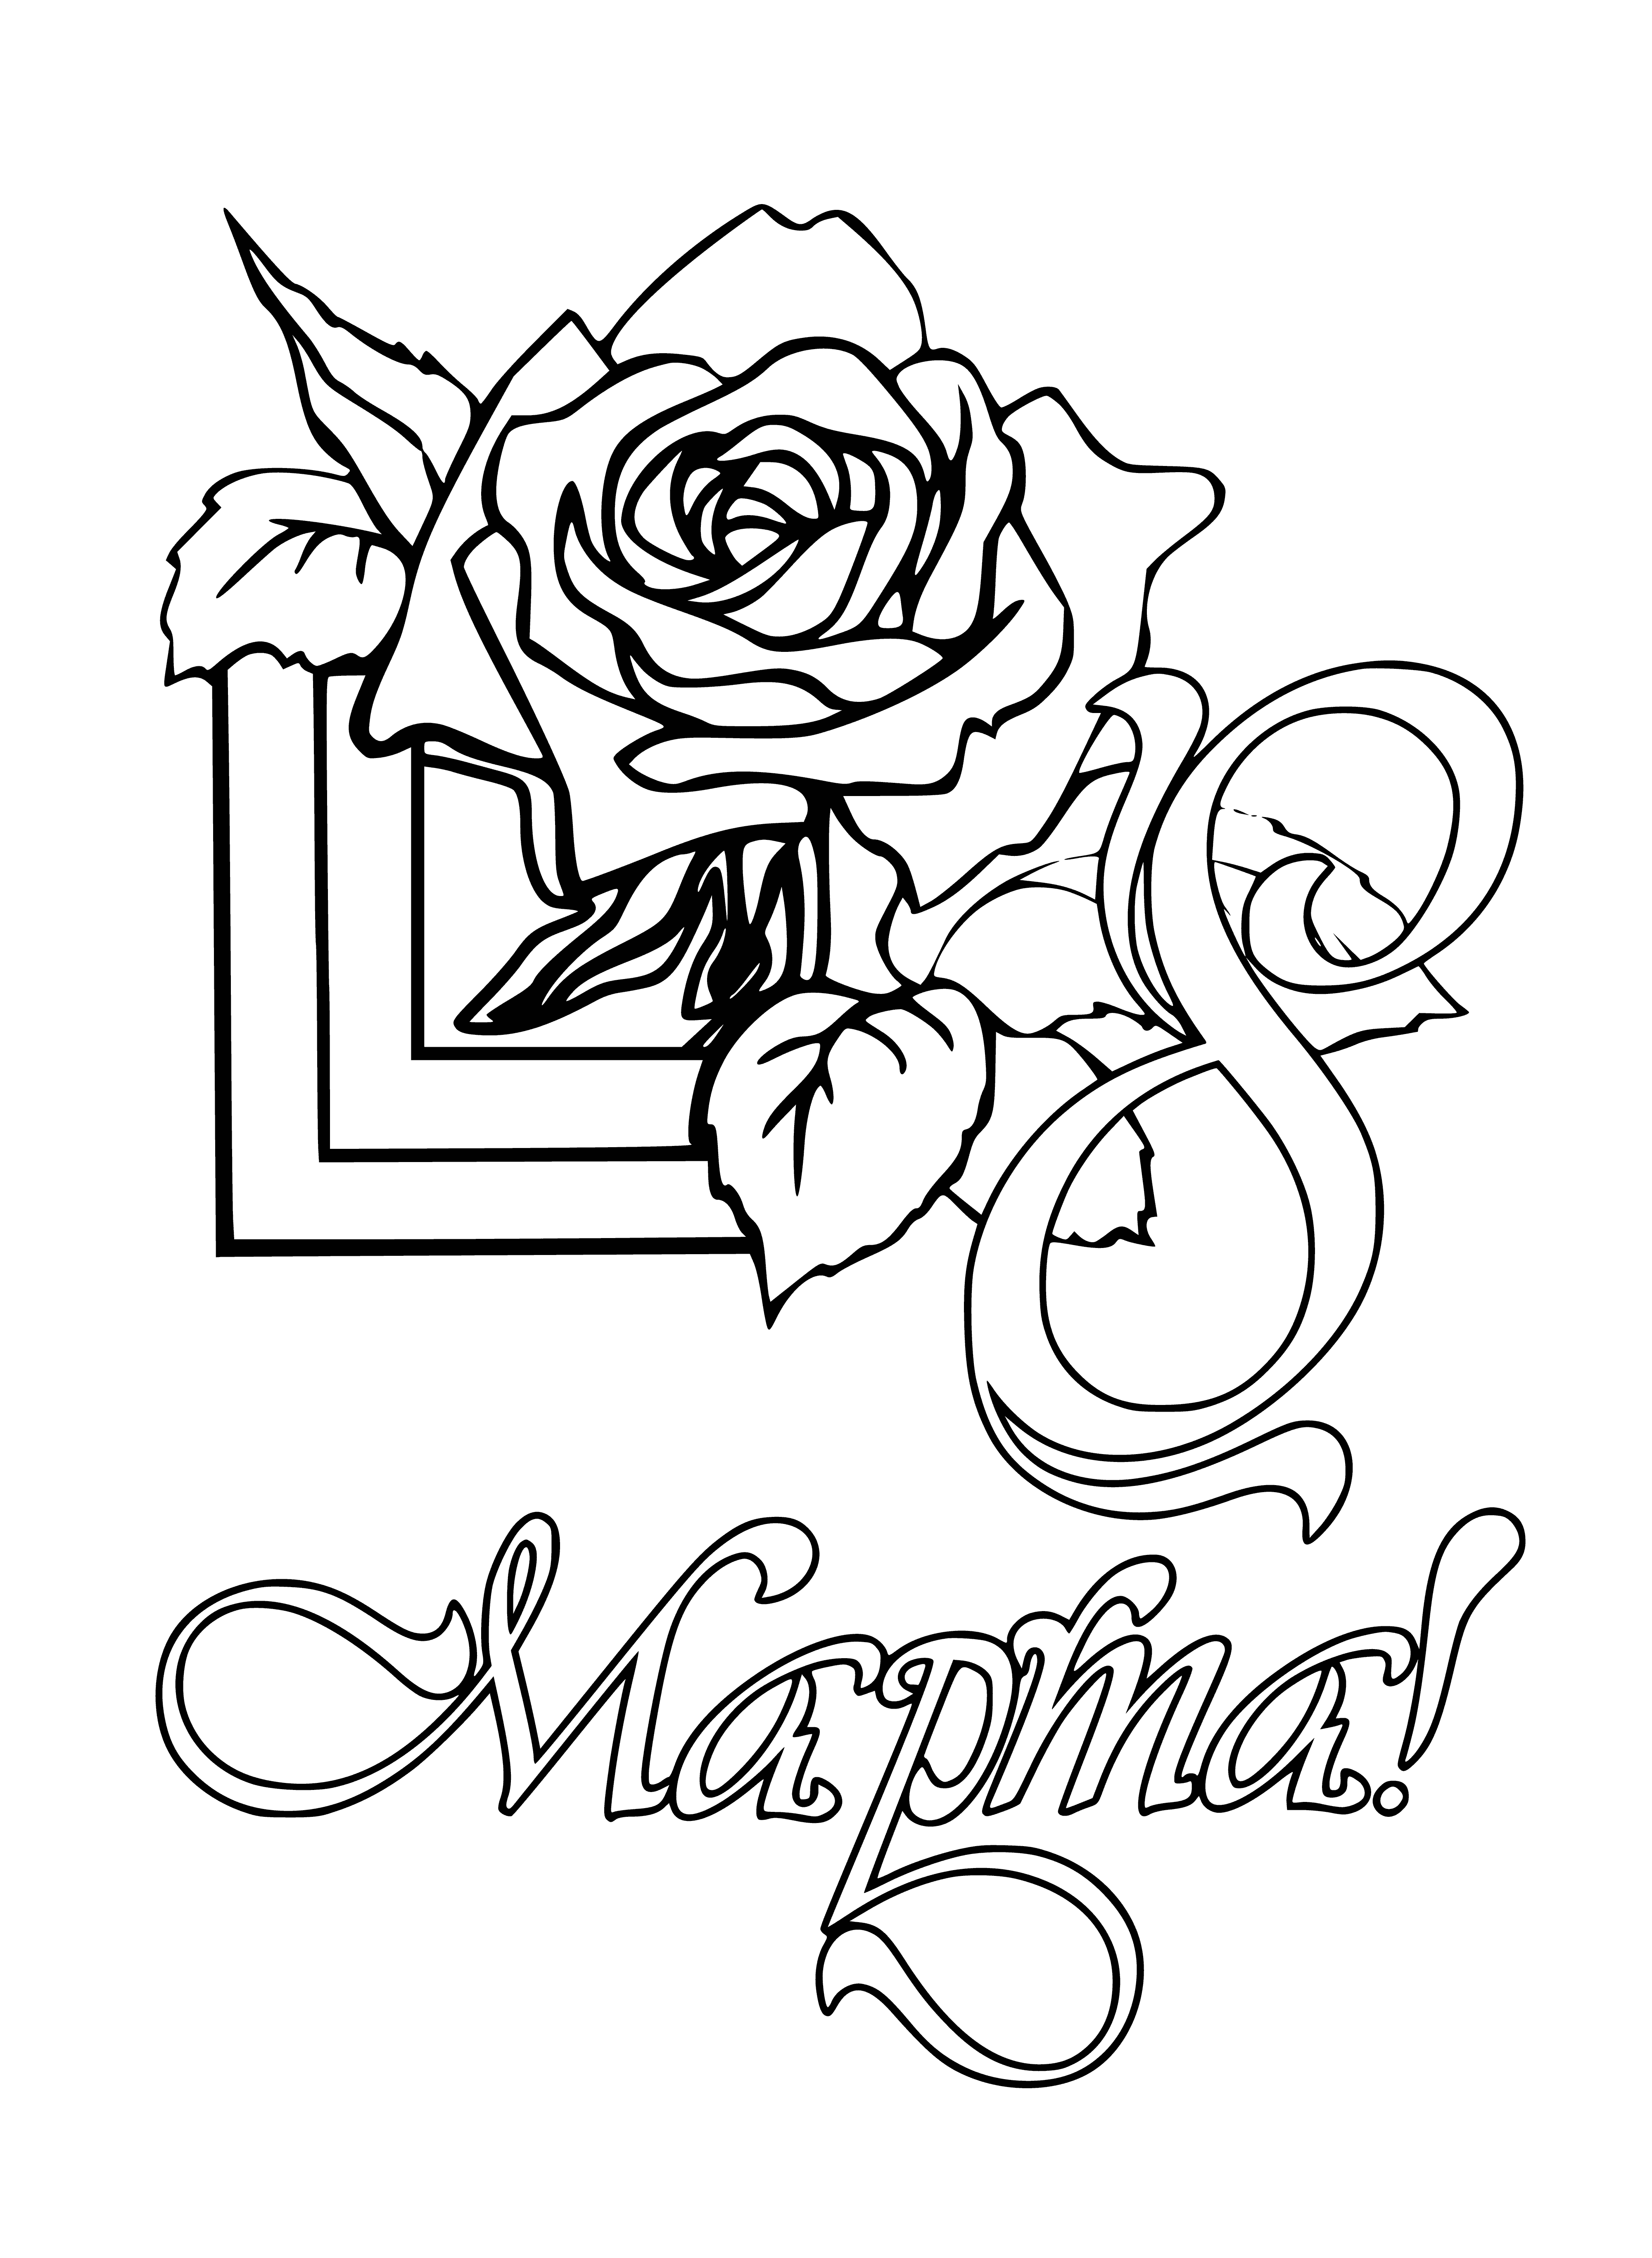 coloring page: Person holds a rose to celebrate International Women's Day (3/8), honoring Suffragettes, civil rights leaders & others who made an impact.